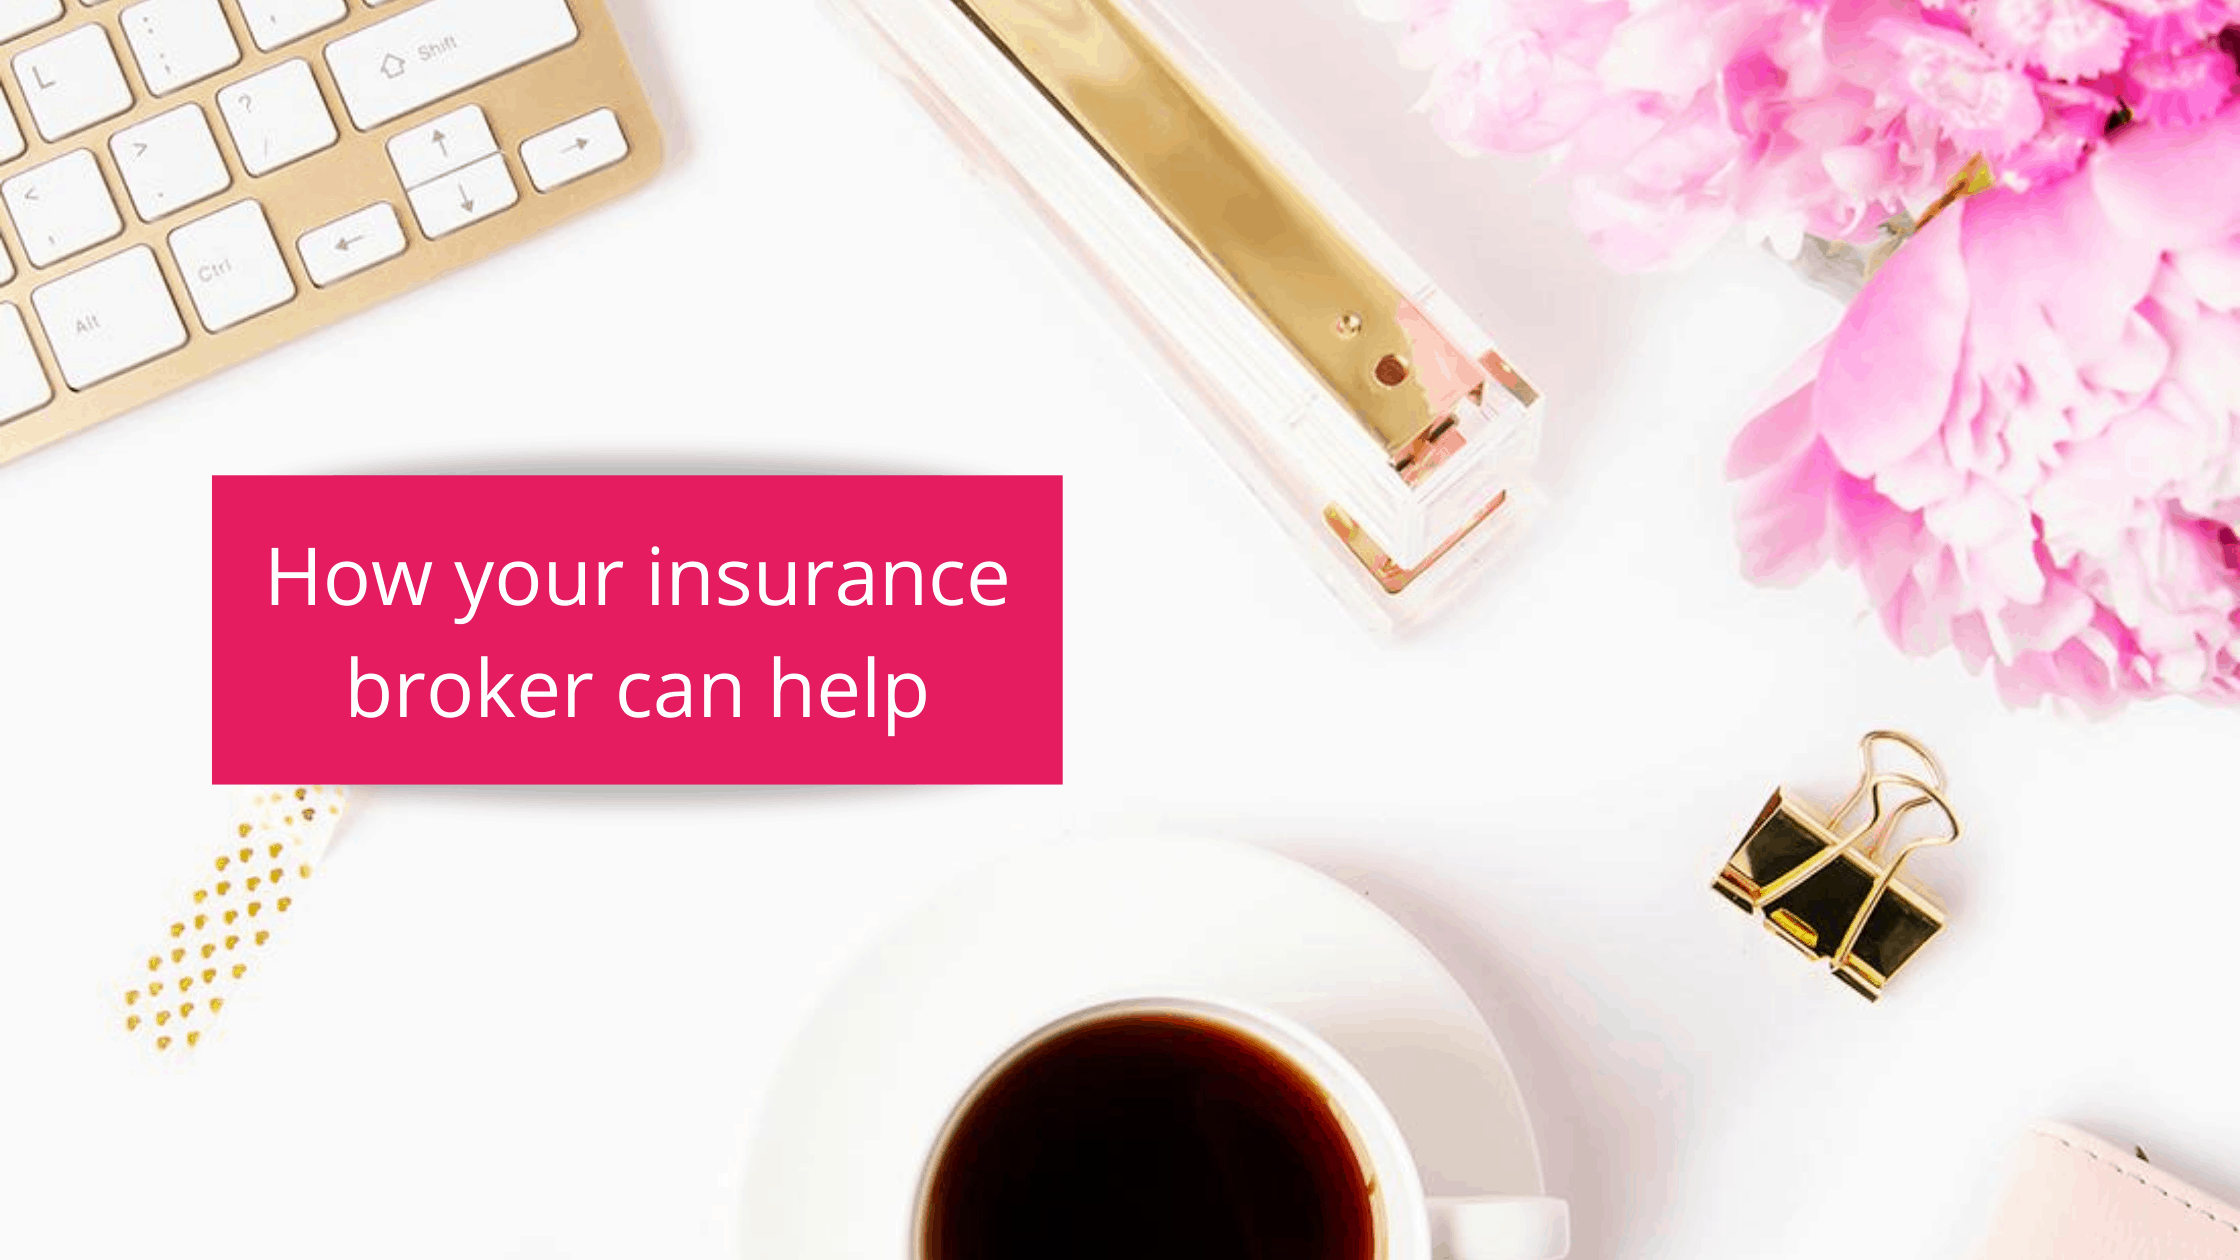 How your insurance broker can help